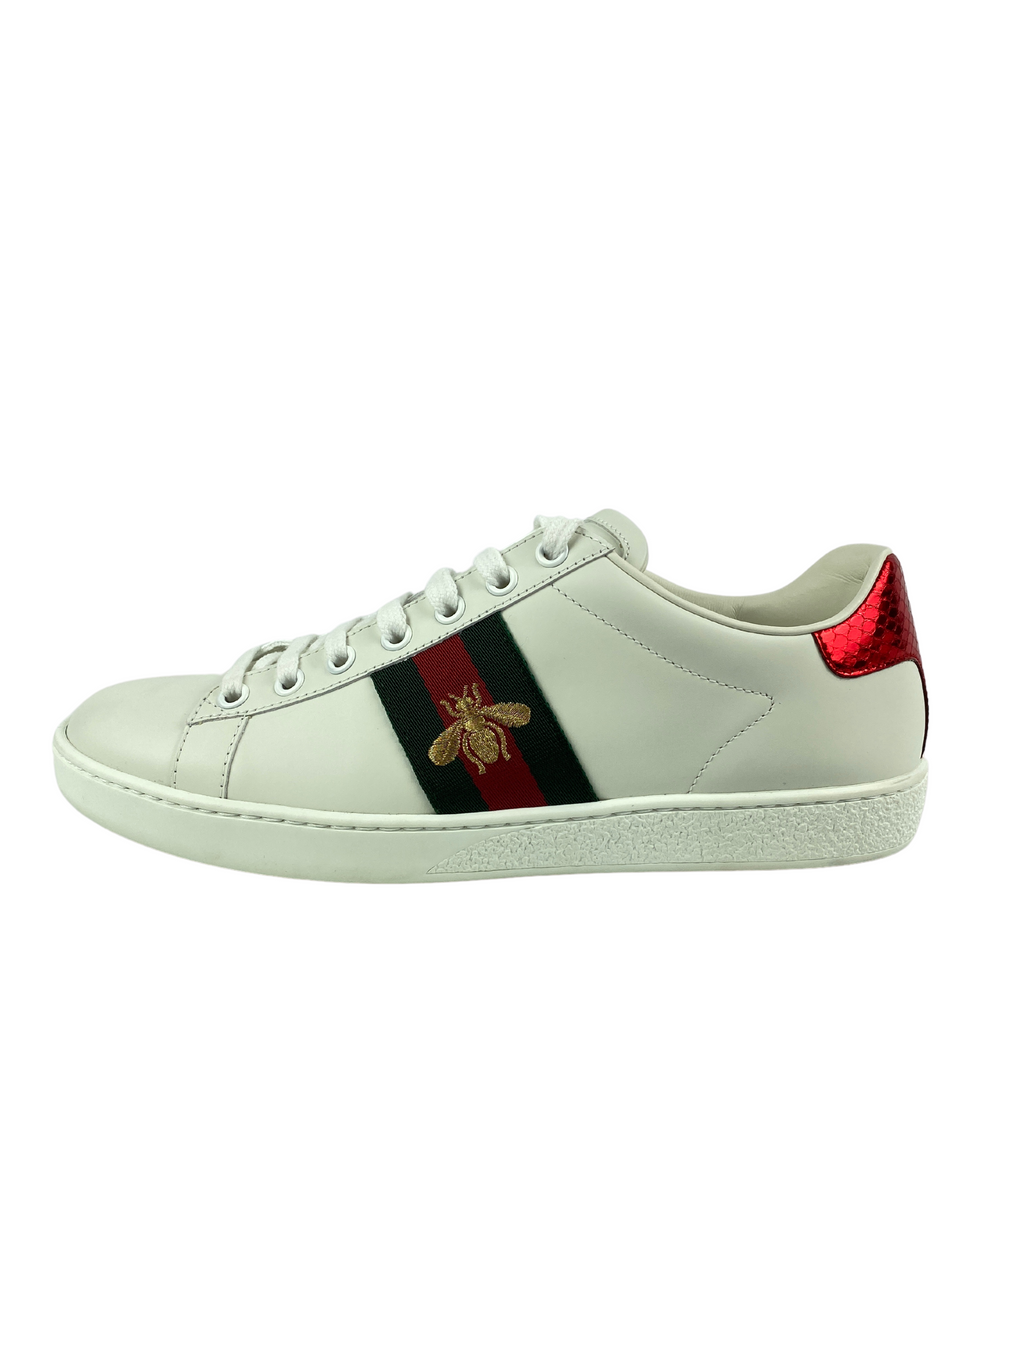 GUCCI - ACE BEE SNEAKERS - SIZE 38 - NEW IN BOX